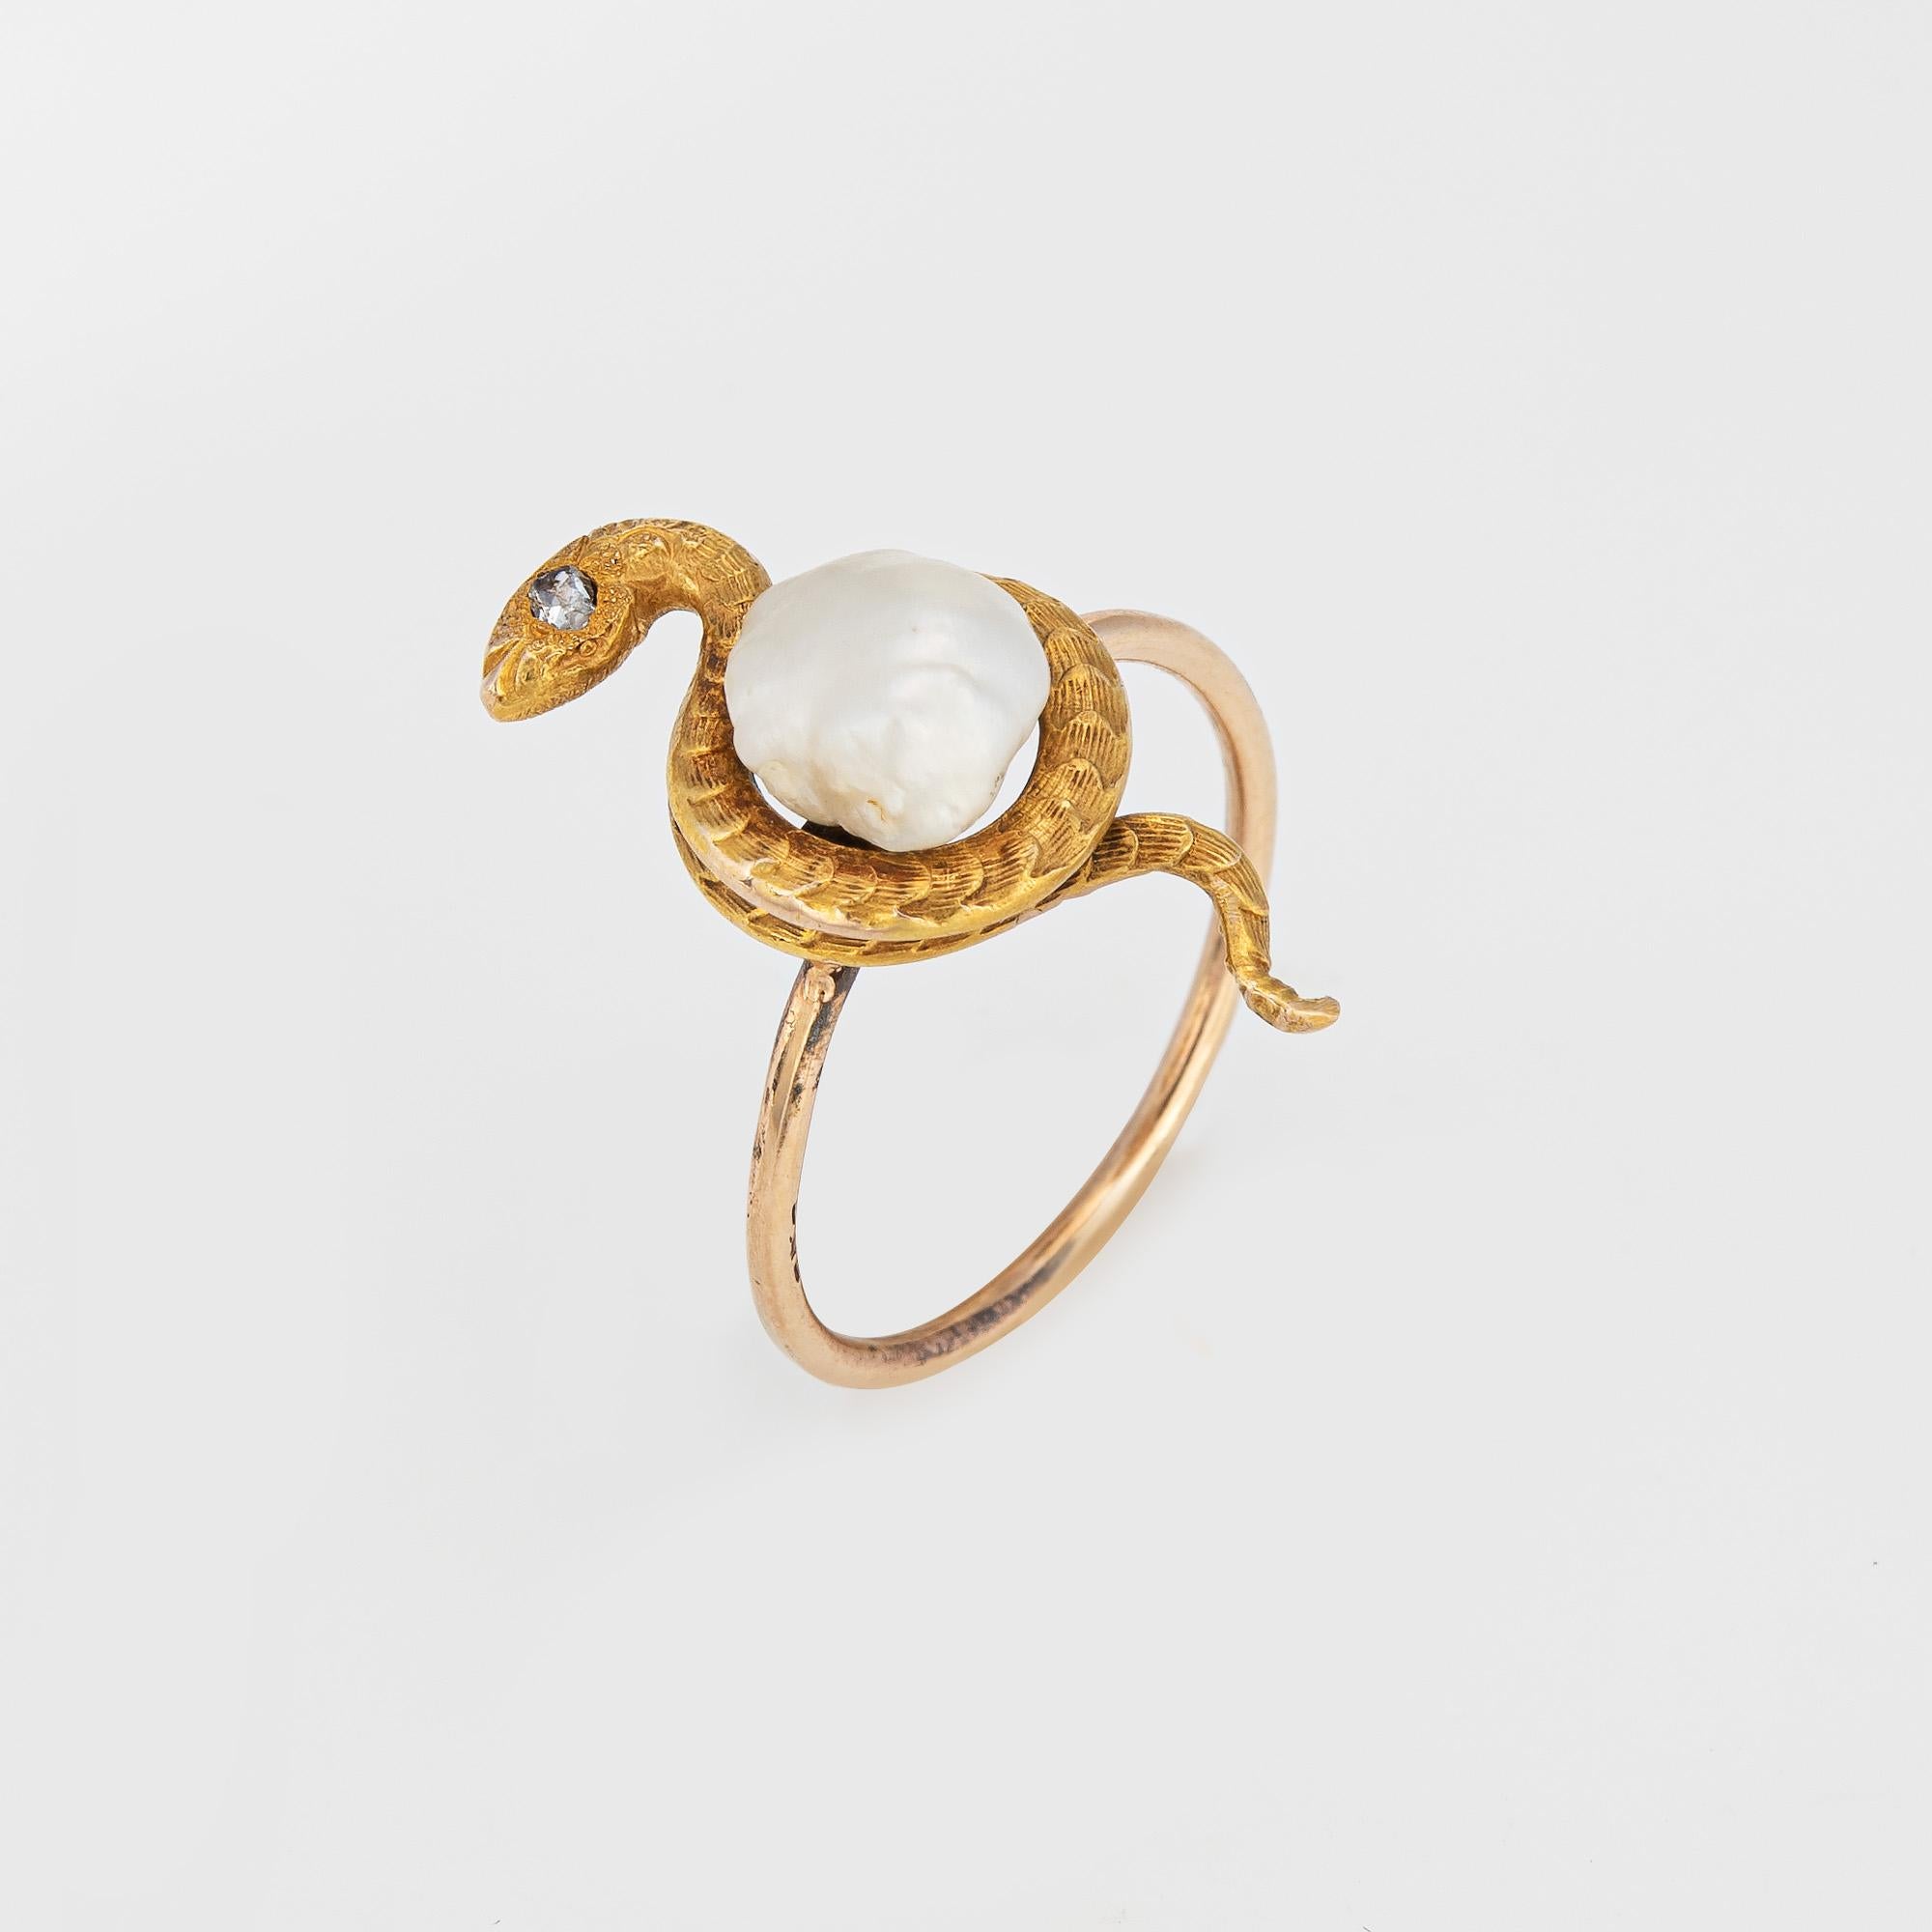 Originally an antique Victorian era stick pin (circa 1880s to 1900s), the diamond & pearl snake ring is crafted in 14 karat yellow gold.

The ring is mounted with the original stick pin. Our jeweler rounded the stick pin into a slim band for the